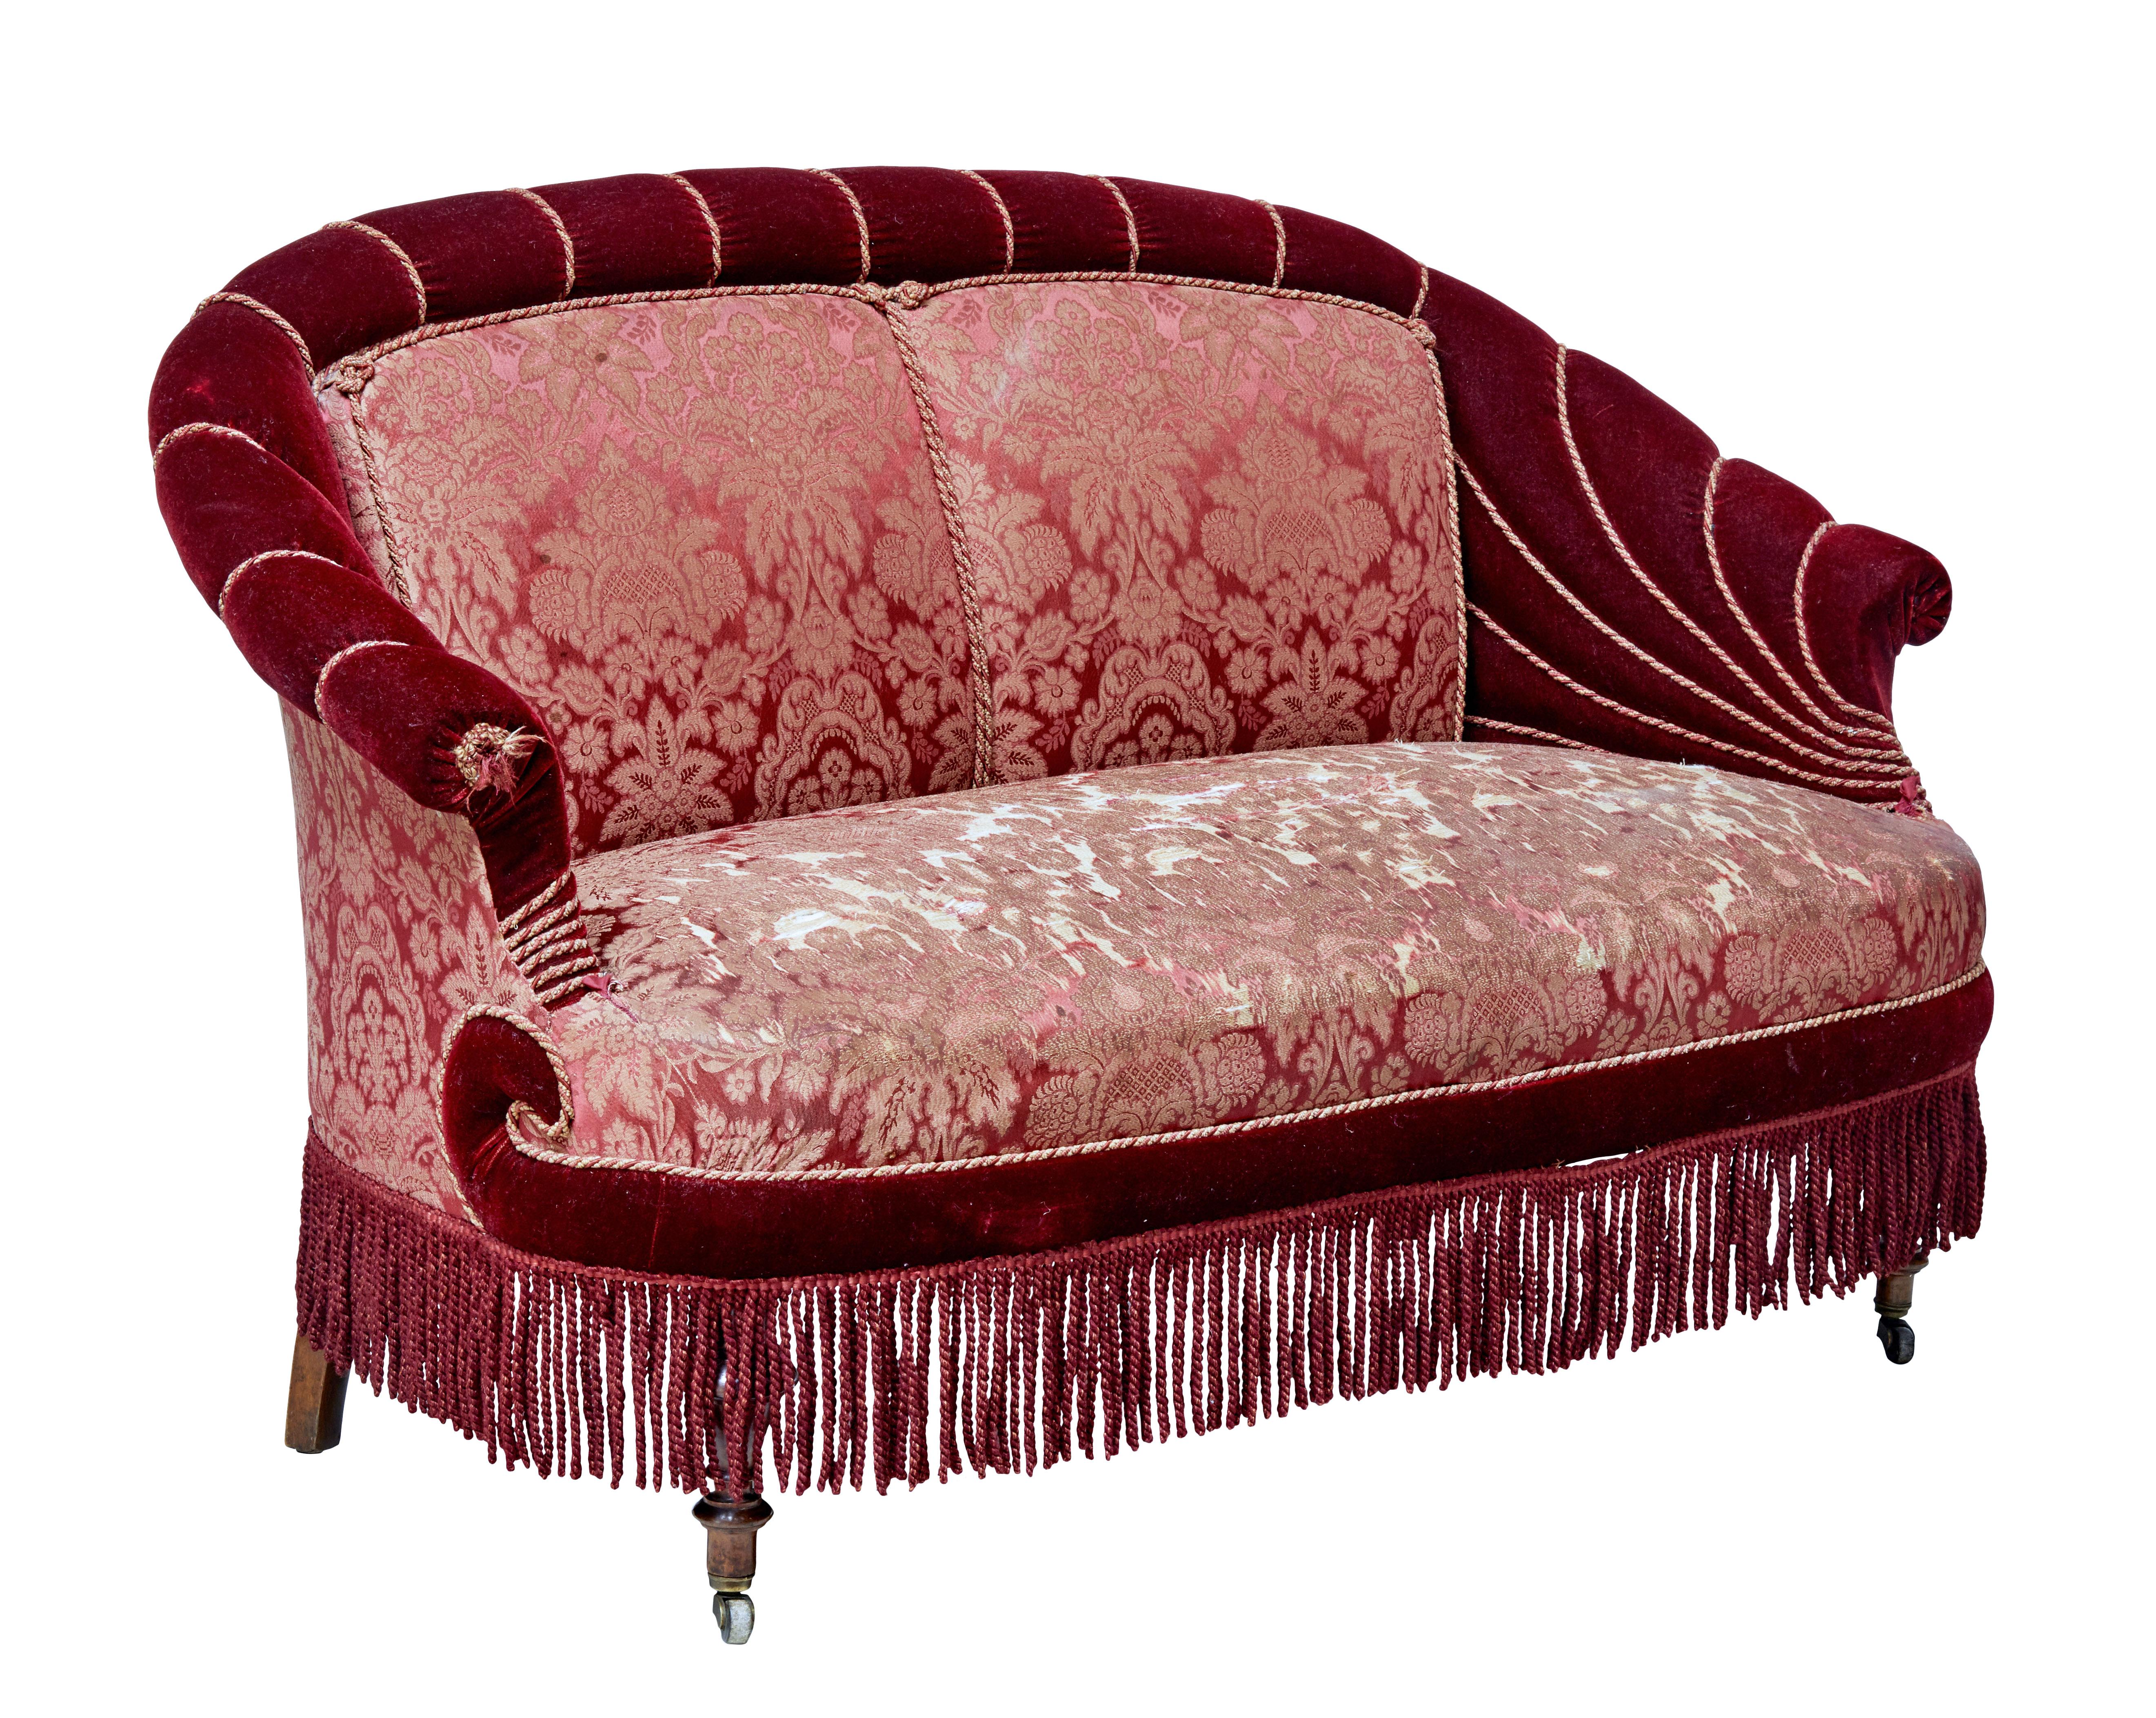 Rare five piece salon suite, comprising on a sofa, two arms and two nursing chairs.

Red velvet with piping and tassles. Floral pattern provides a fitting contrast to the bold red fabric.

Standing on front mounted castors.

Wear and holes to